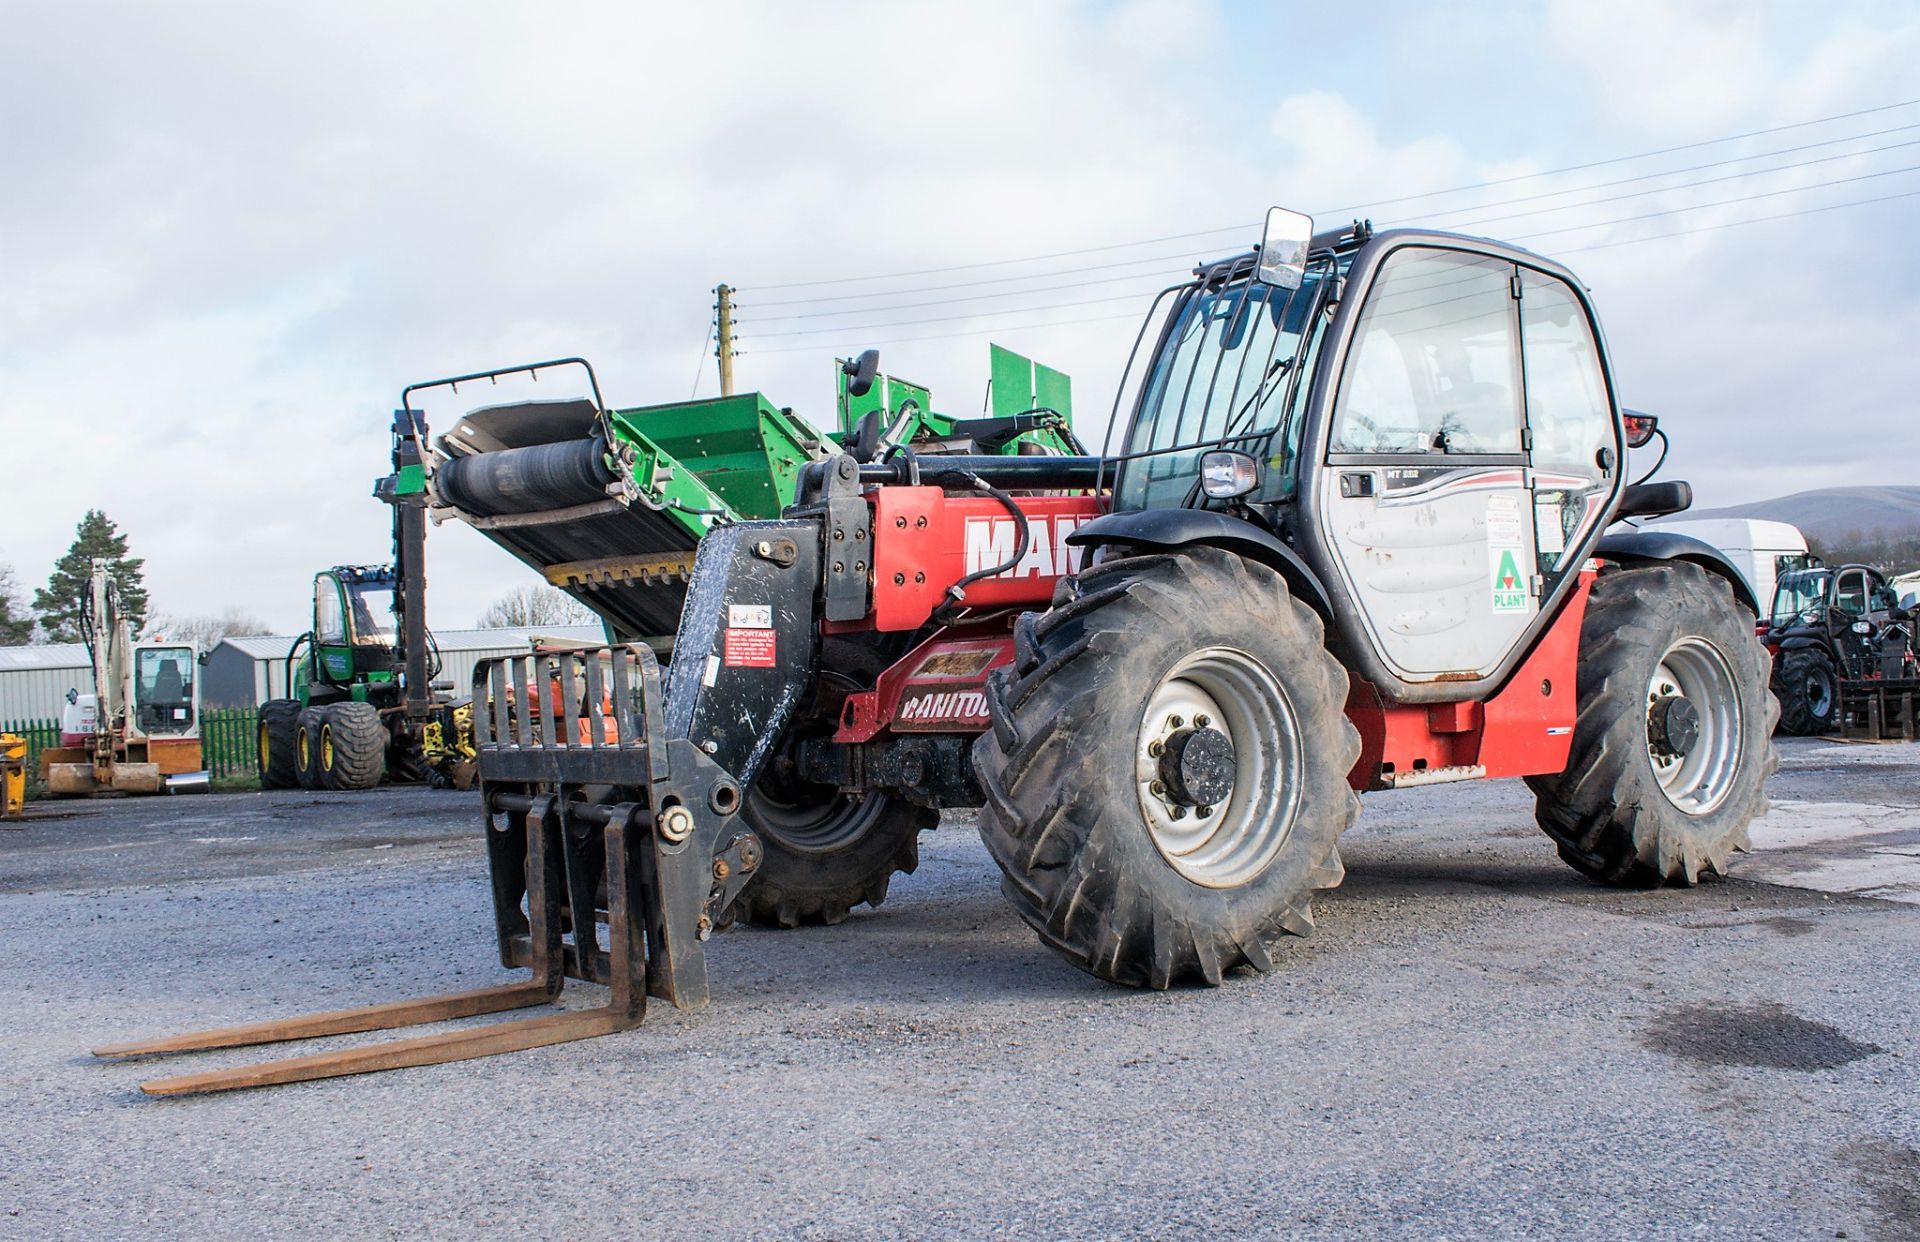 Manitou MT932 9 metre telescopic handler Year: 2014 S/N: 940646 Recorded Hours: 1130 c/w rear camera